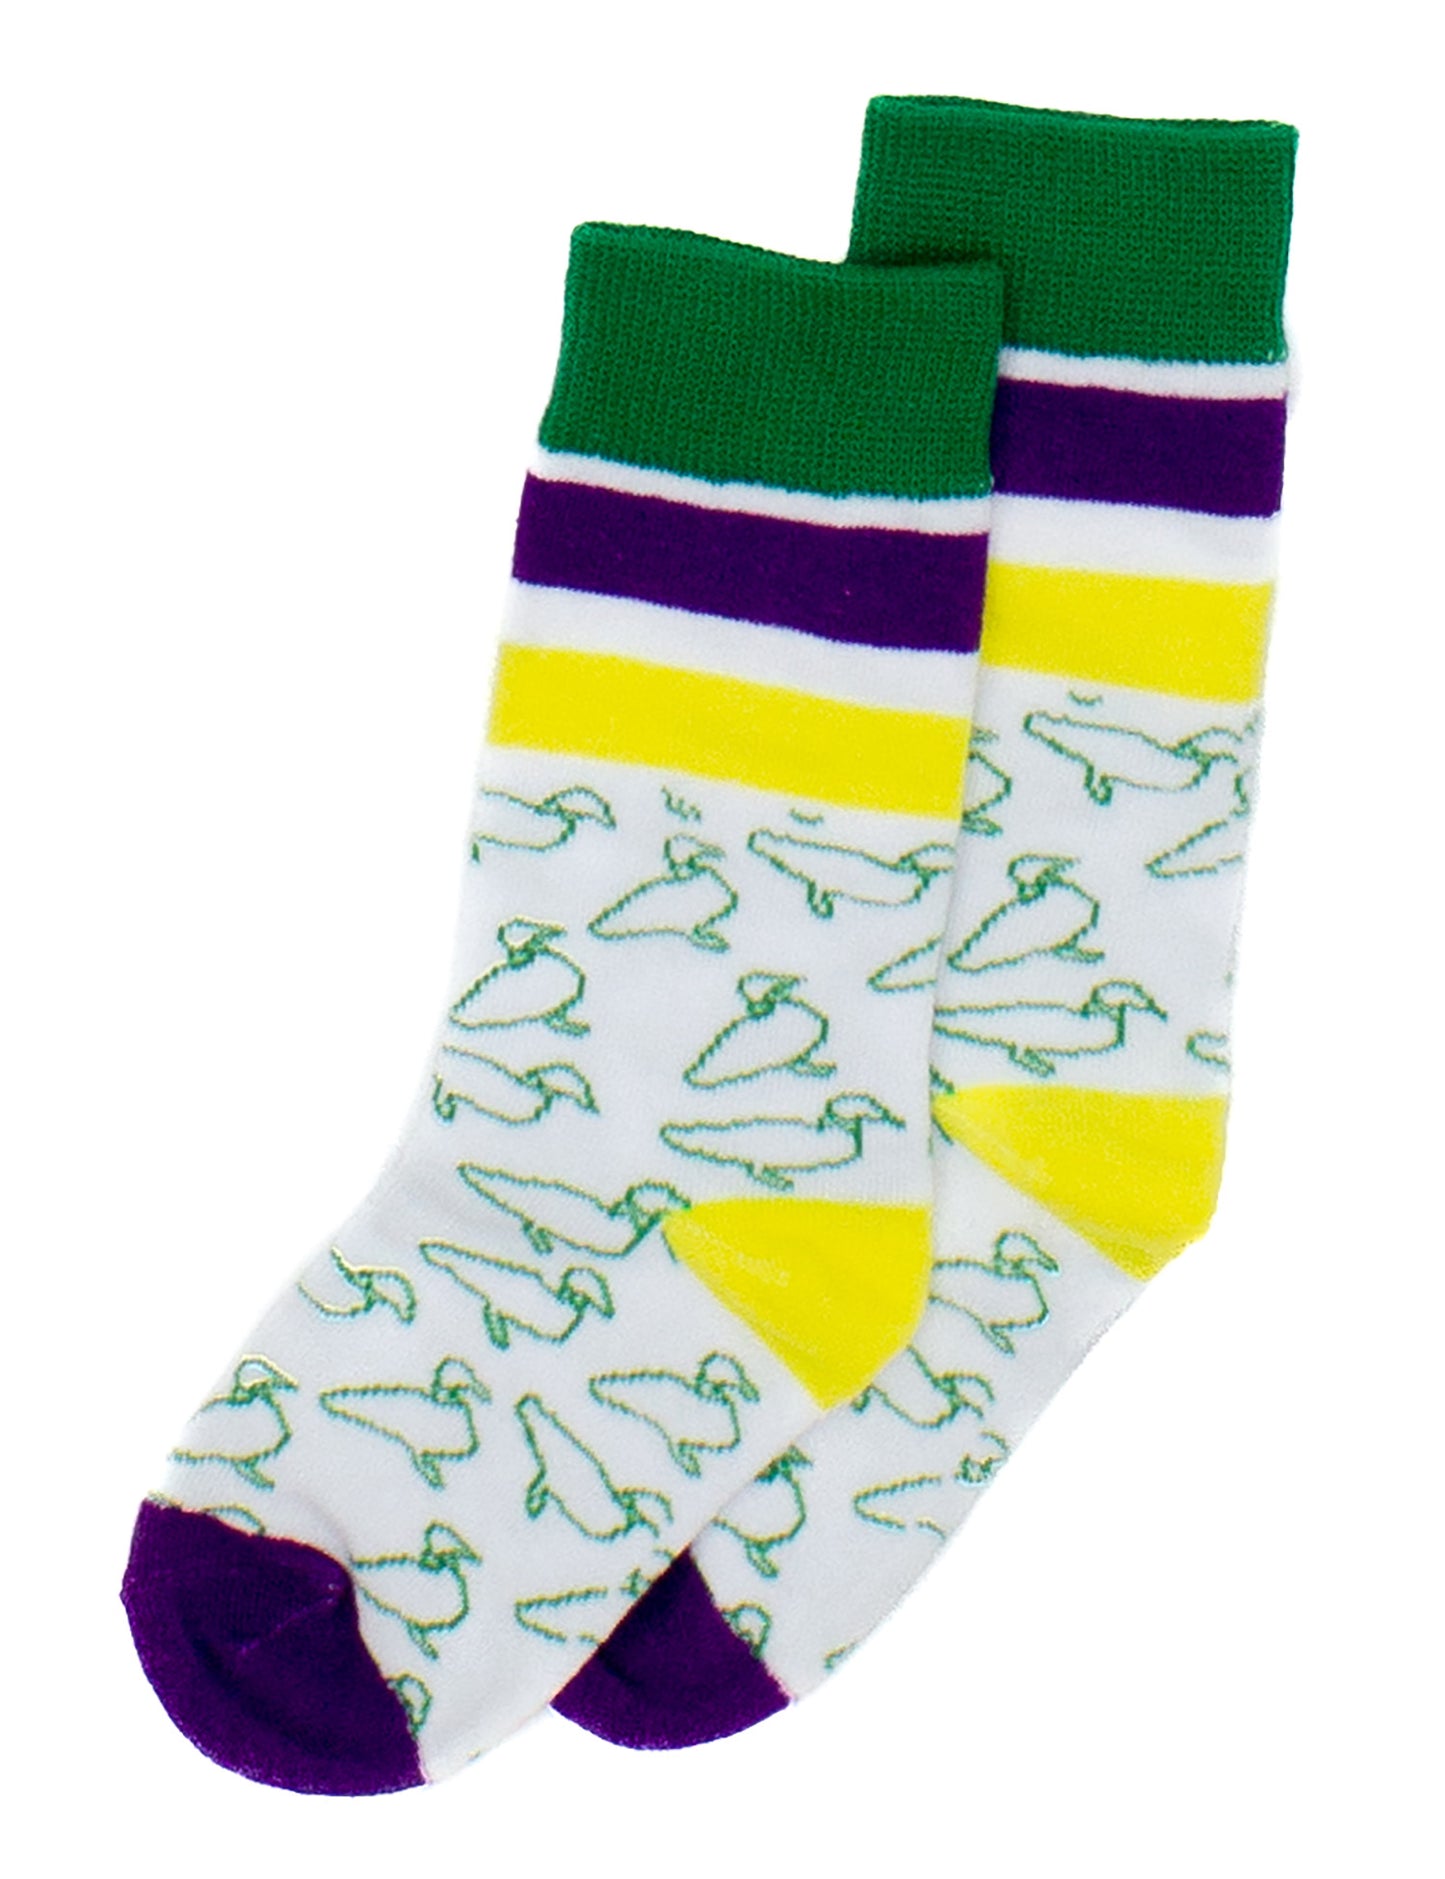 A pair of vibrant Properly Tied Lucky Duck Mardi Gras socks with green and purple stripes.